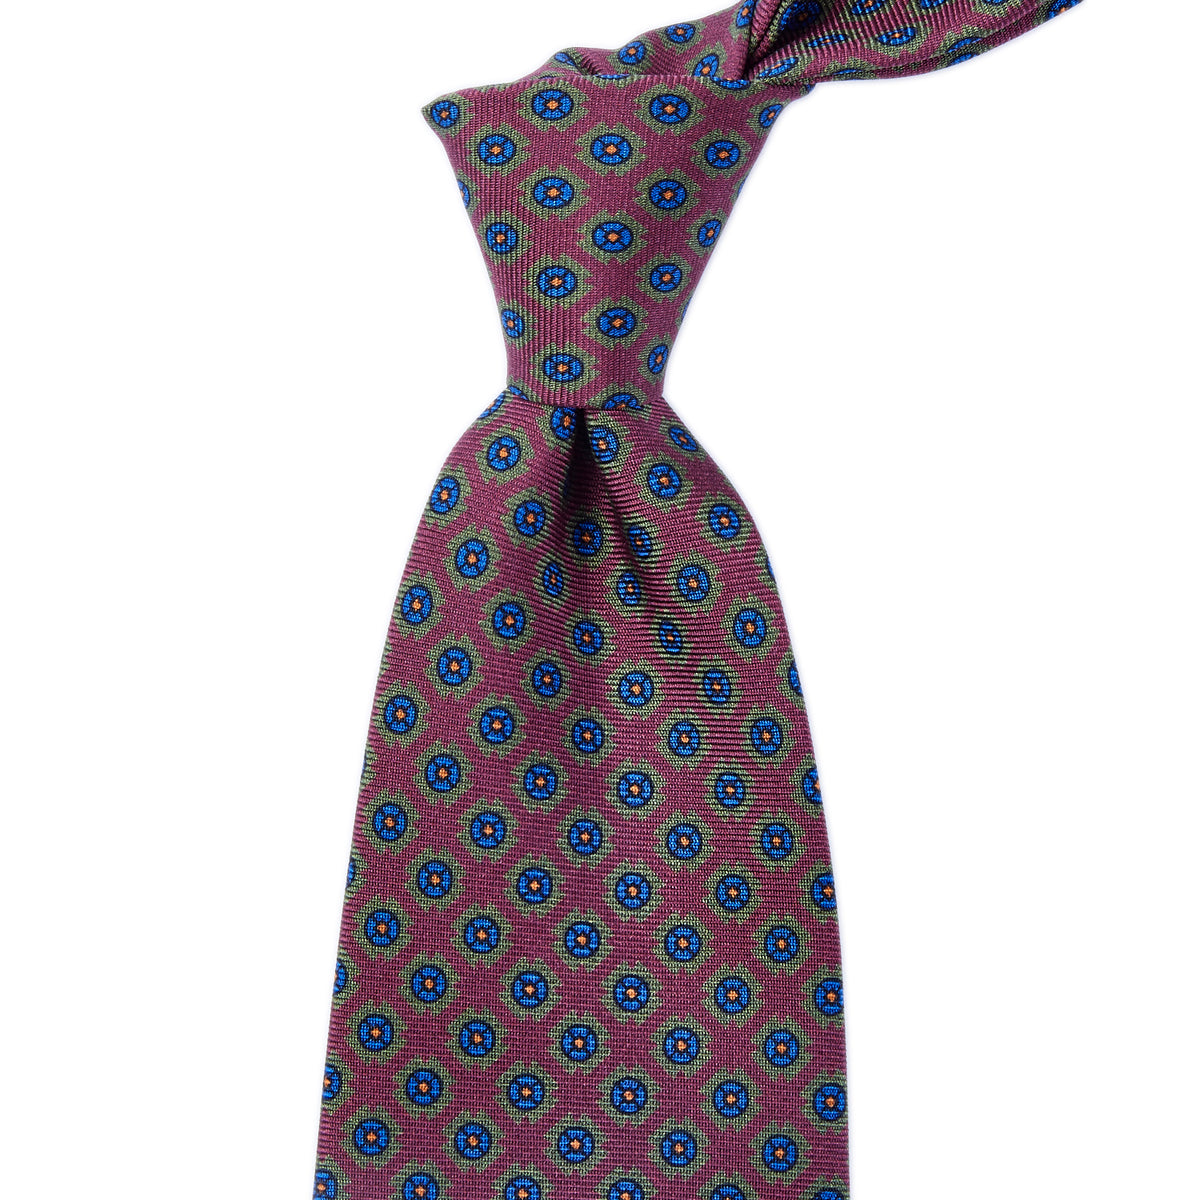 A Sovereign Grade Wine Deco Square Printed Silk Tie, handmade in the United Kingdom, with a blue and red pattern from KirbyAllison.com.